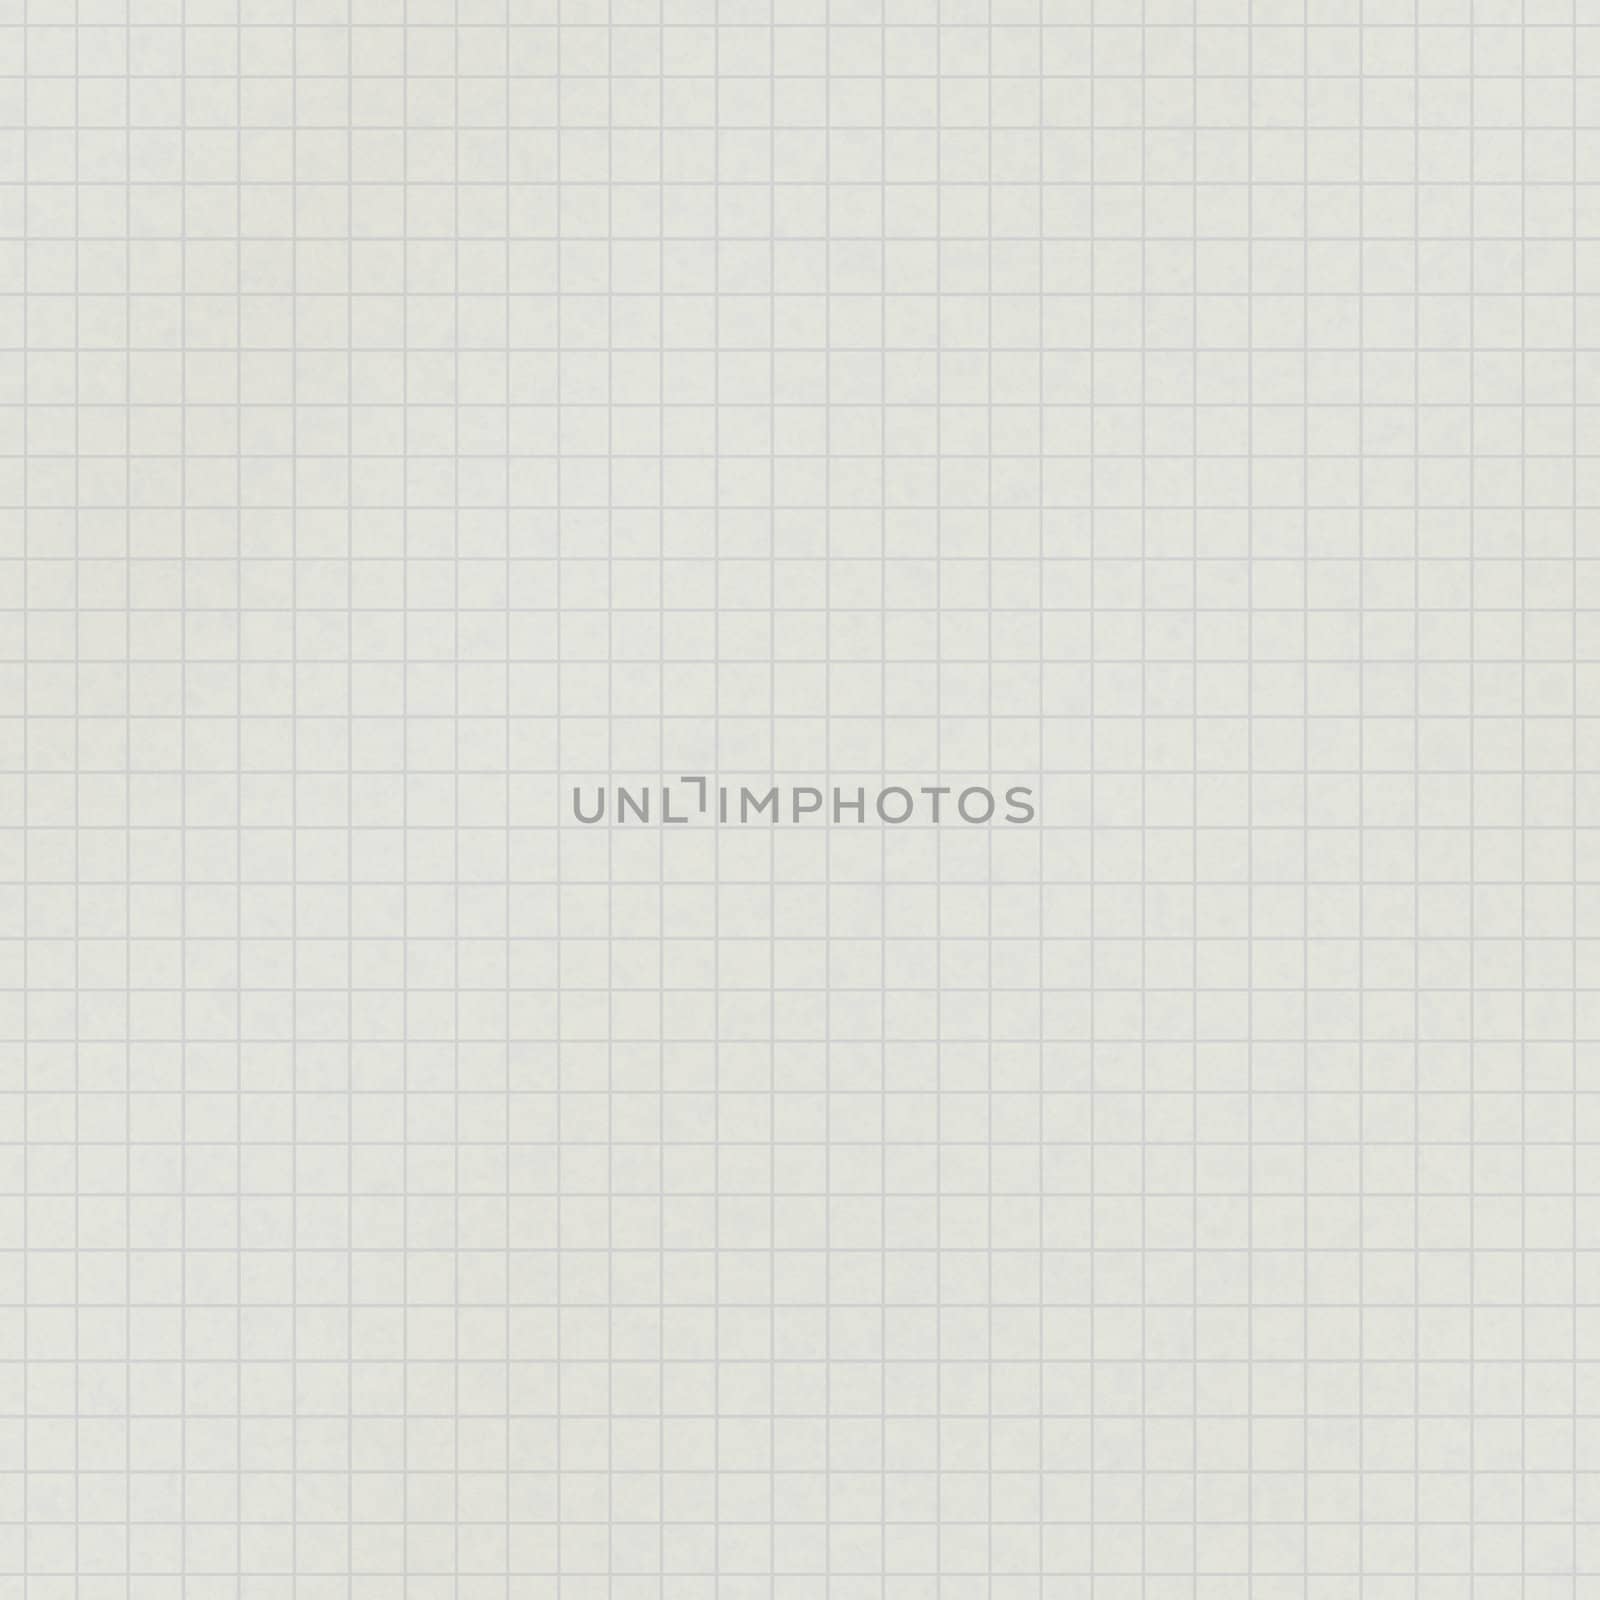 square paper background, tiles seamless as a pattern, plenty of copy space for your text

